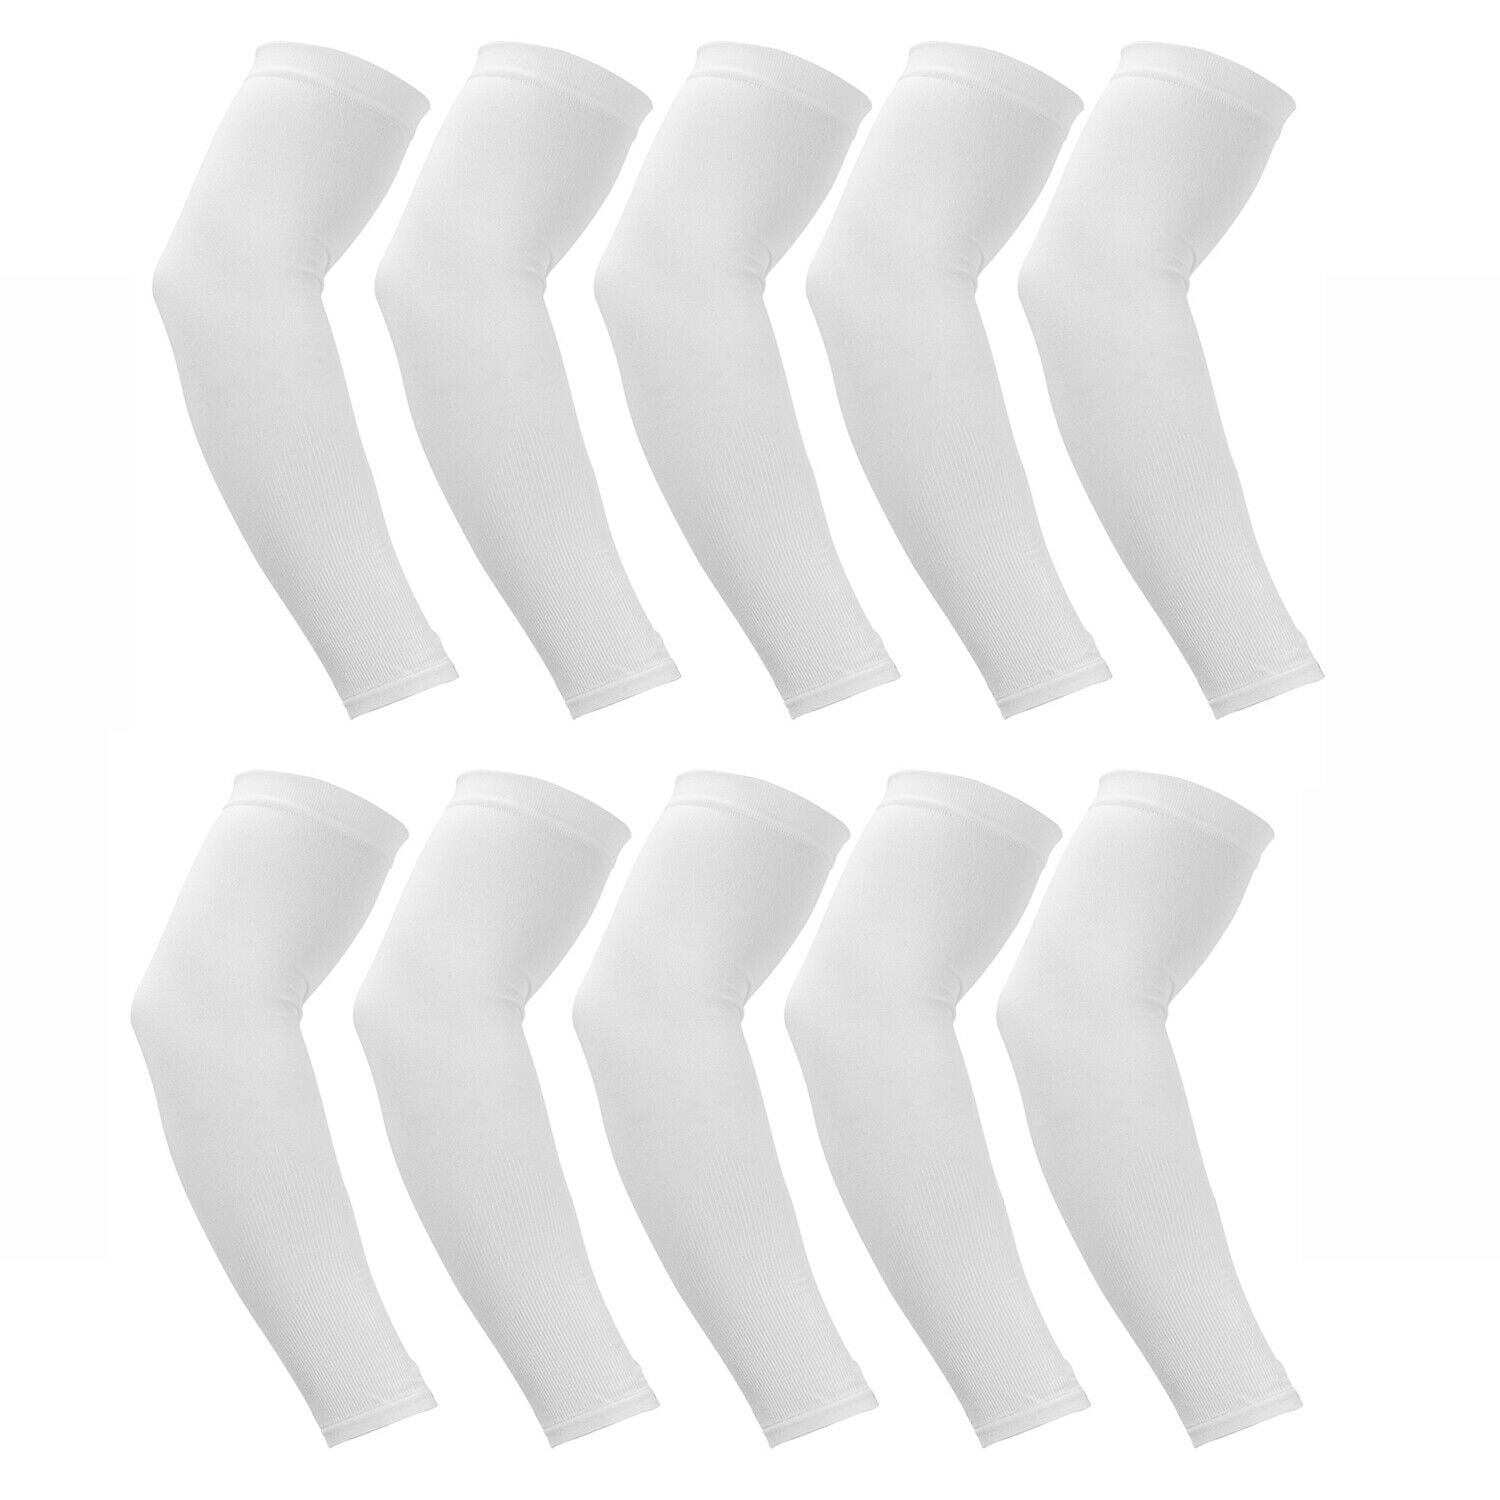 Details about   10Pairs Cooling Arm Sleeves Outdoor Sport Basketball UV Sun Protection Arm Cover 